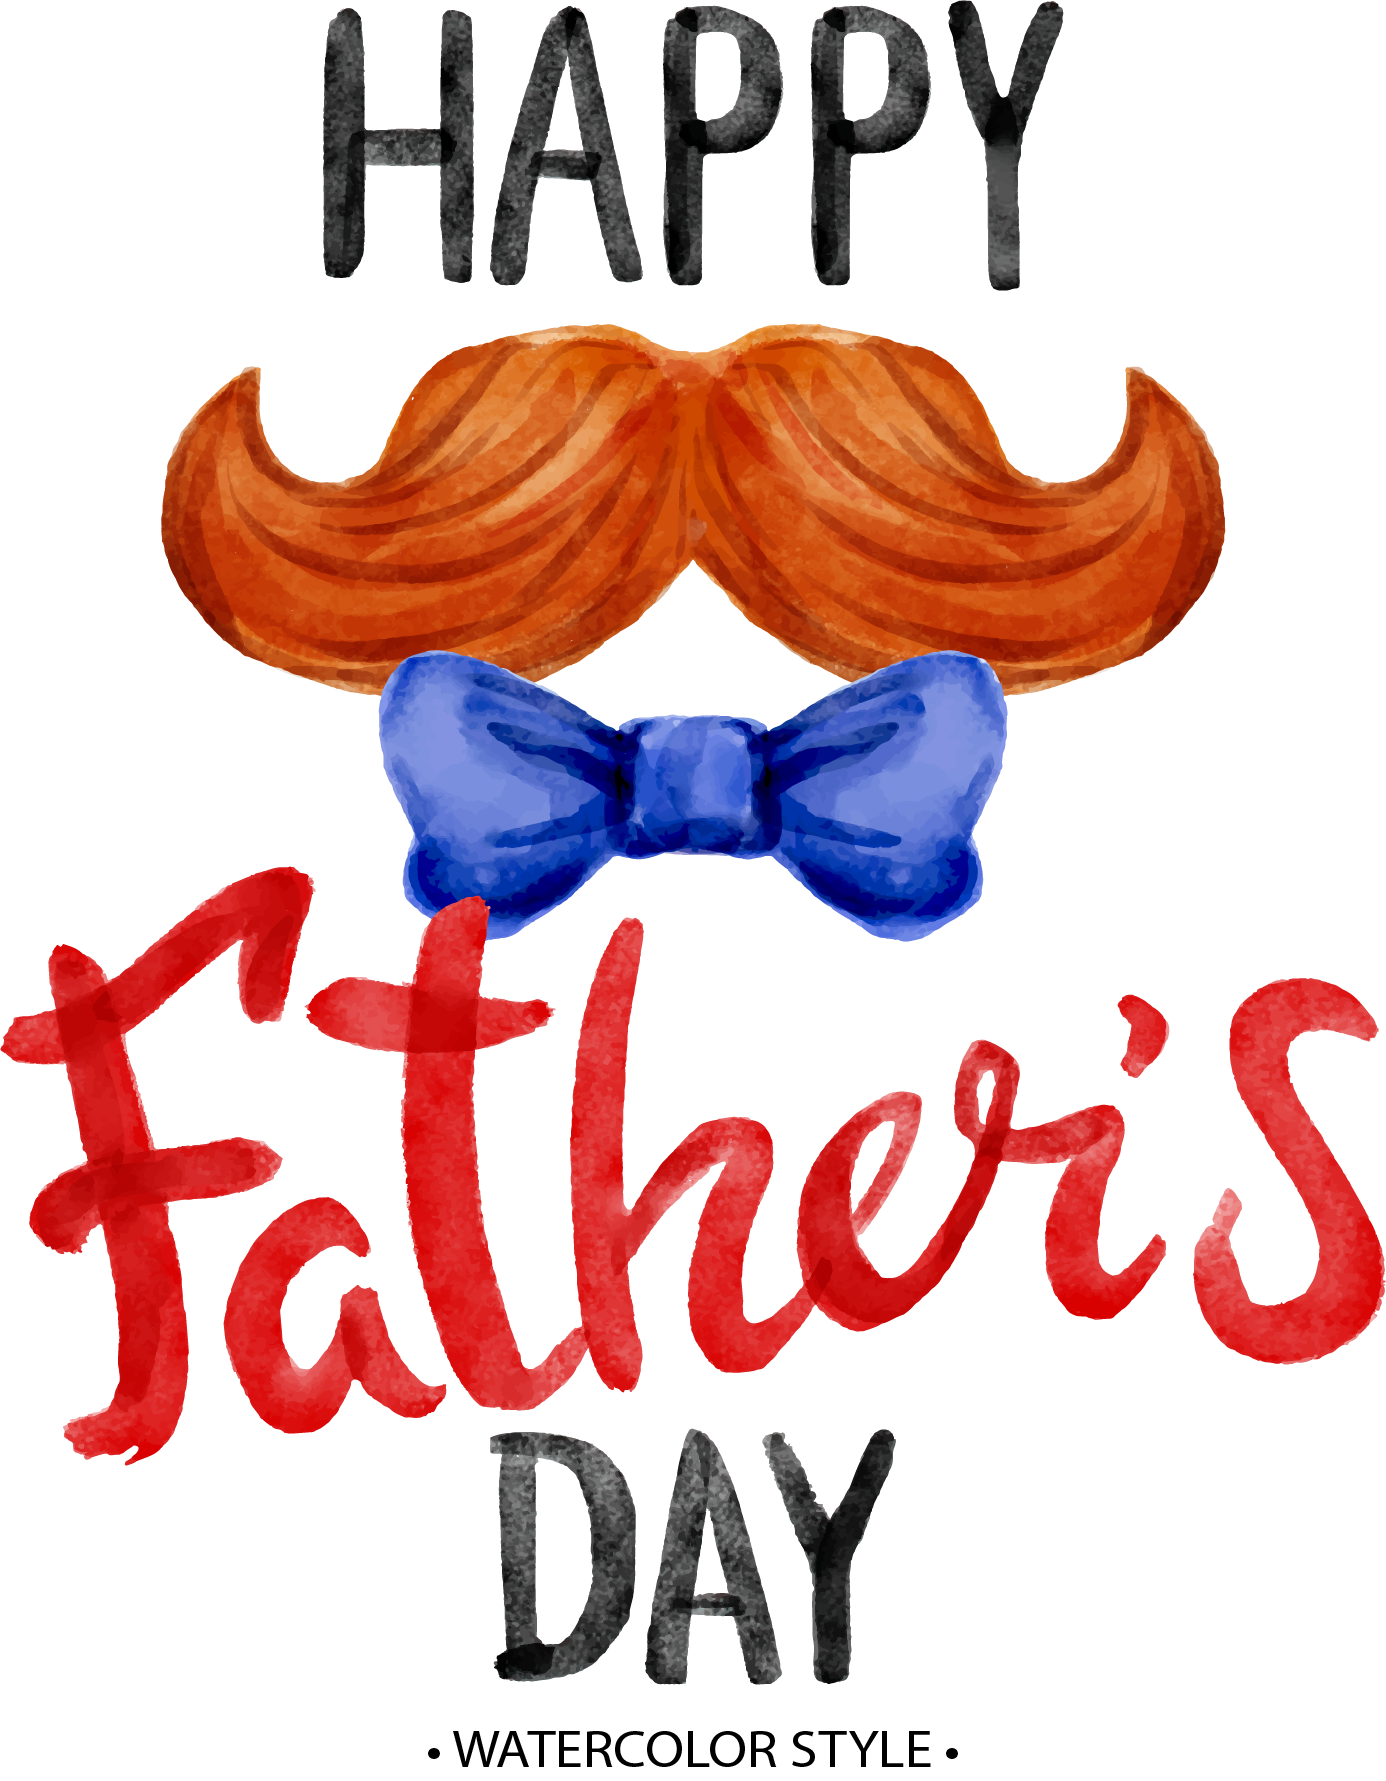 Download Clipart beer fathers day, Clipart beer fathers day ...